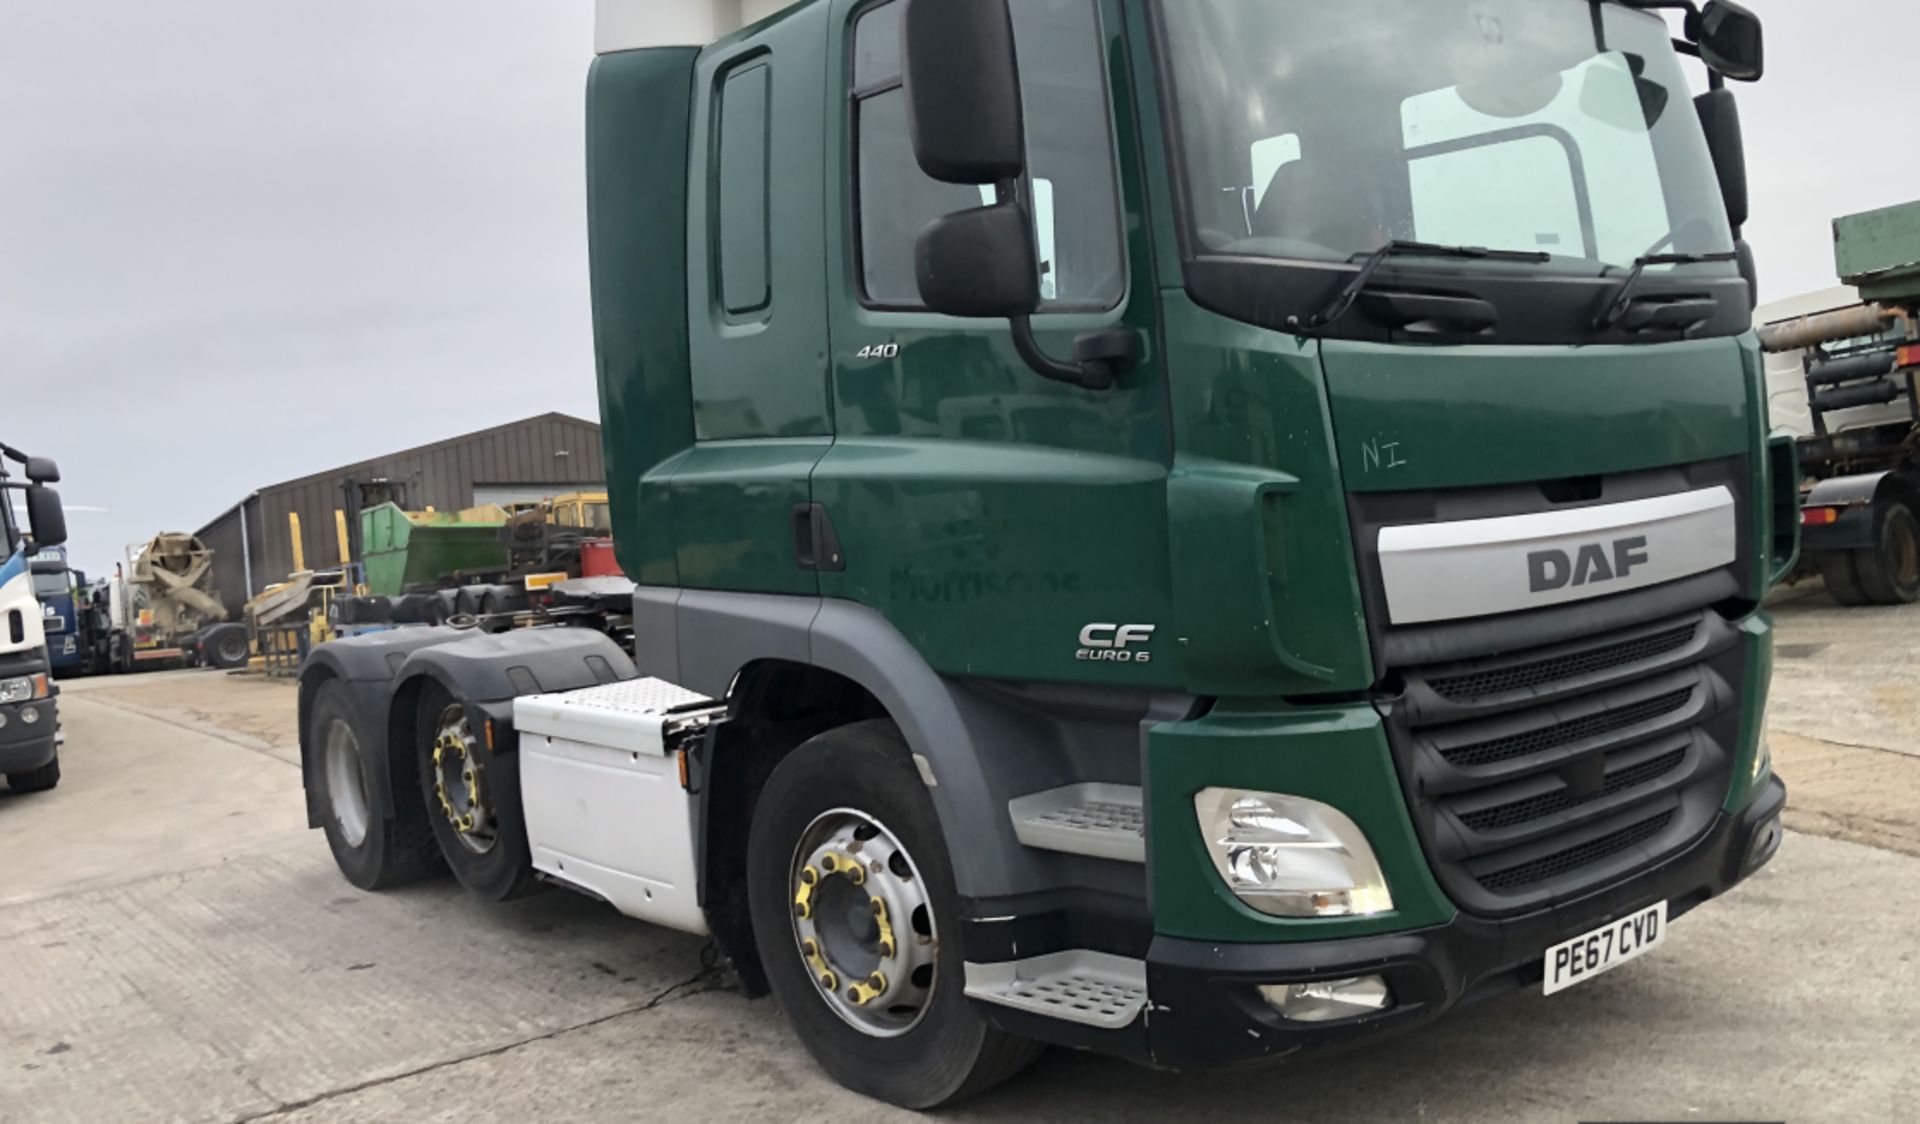 DAF 85 CF 6×2 TRACTOR UNIT - Image 7 of 10